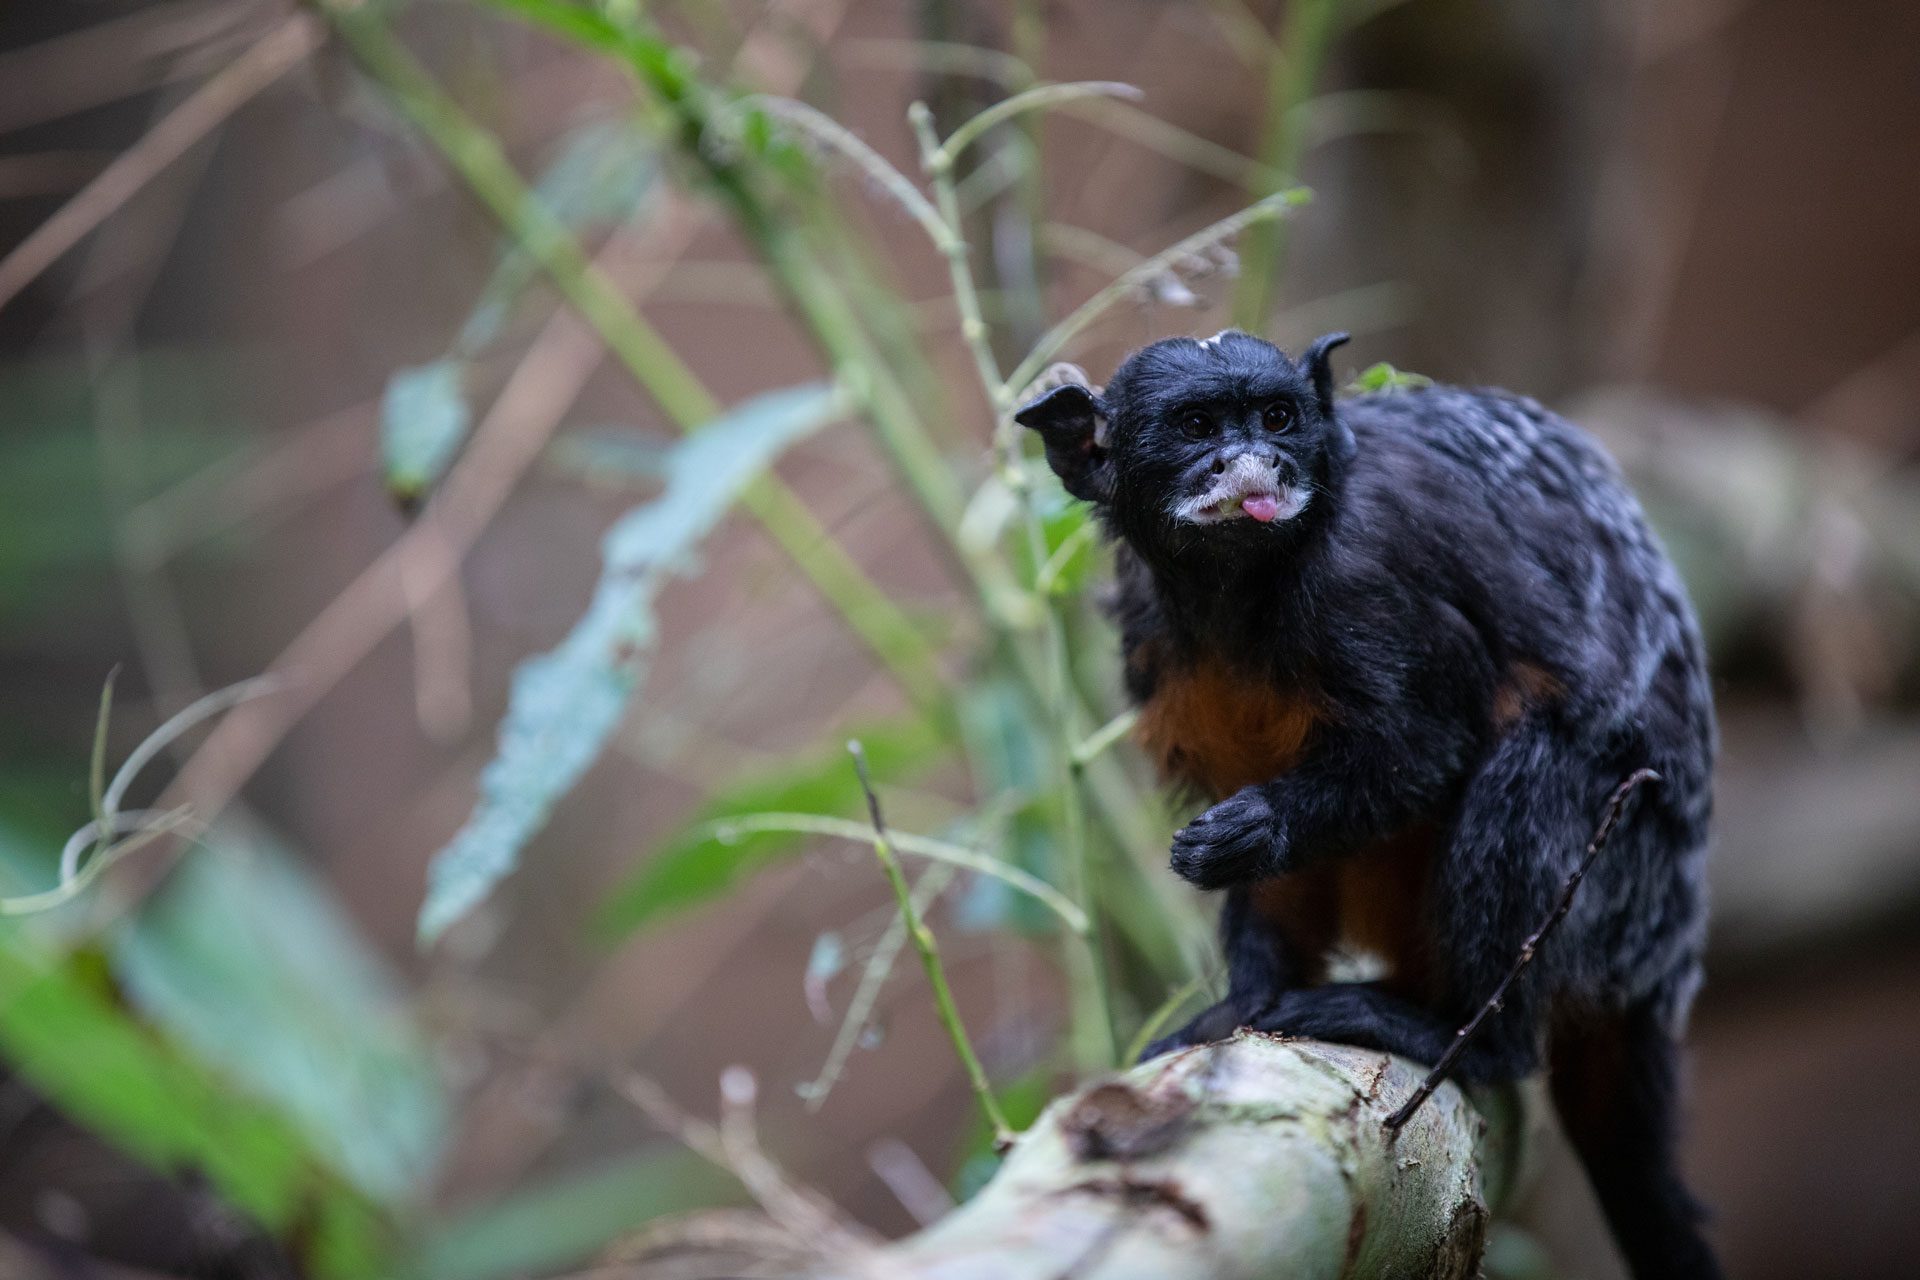 A red-bellied tamarin perched on a log